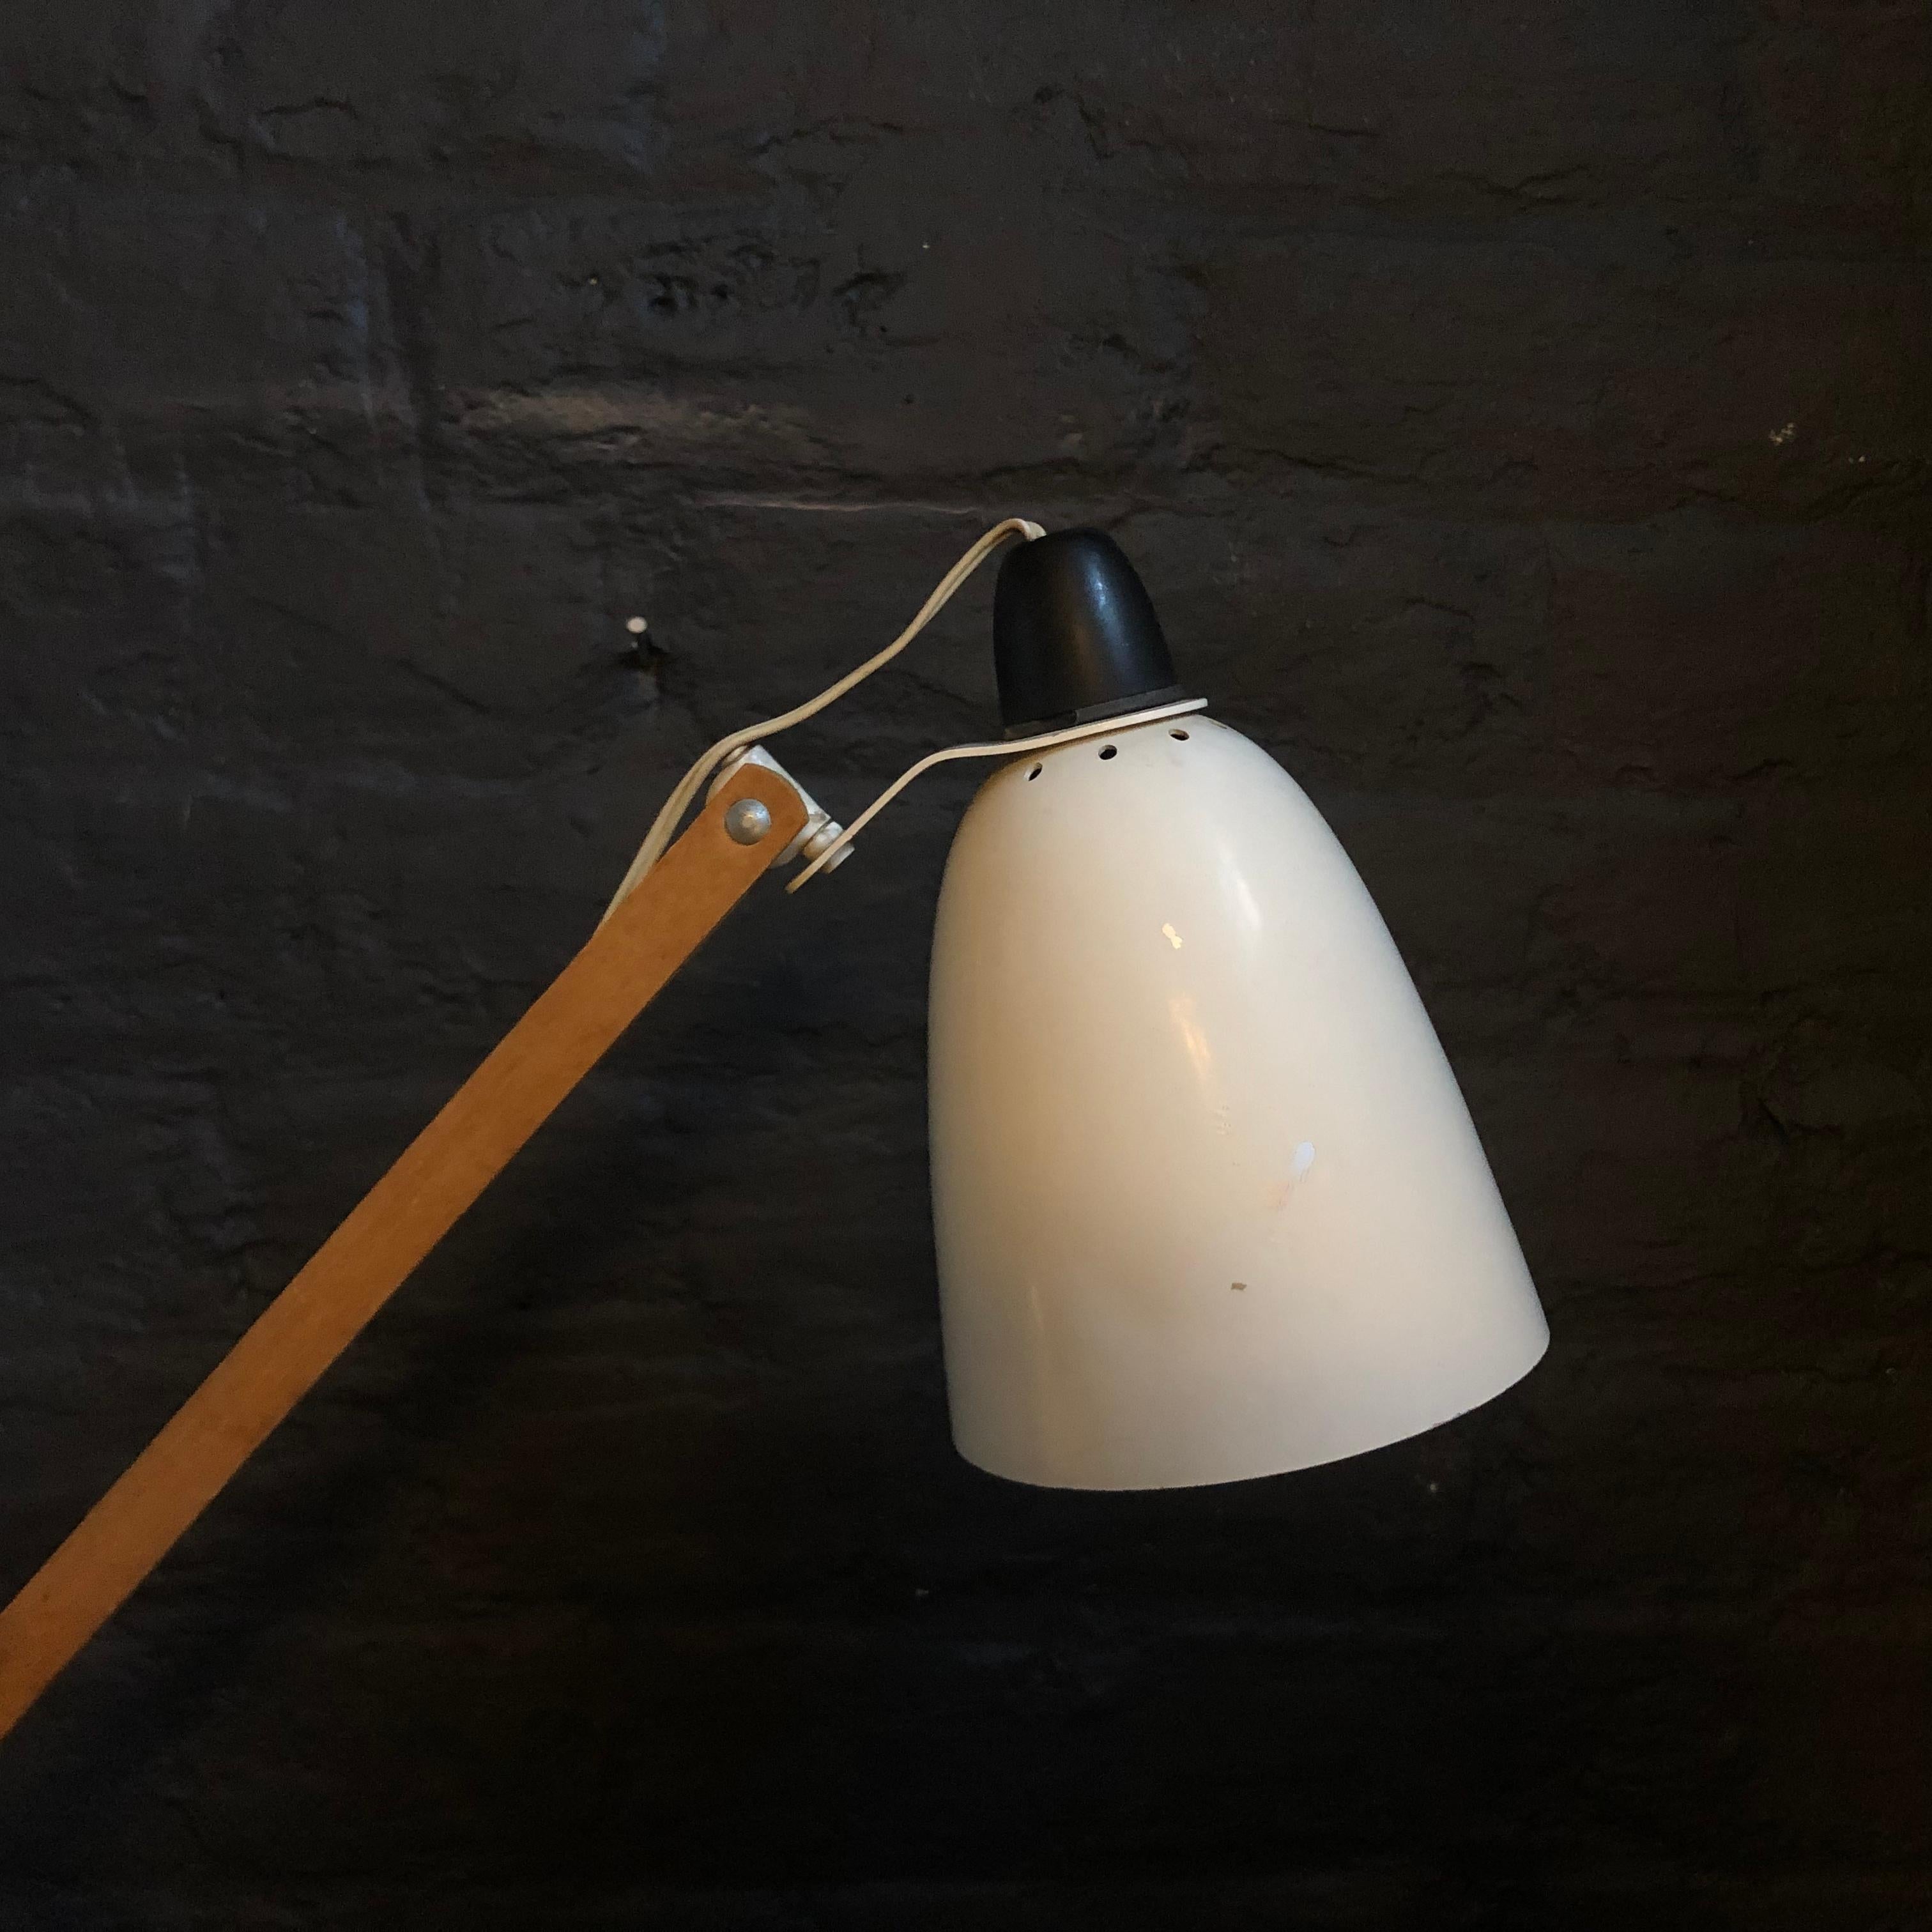 English Vintage Midcentury Maclamp by Terence Conran Desk Lamp in White